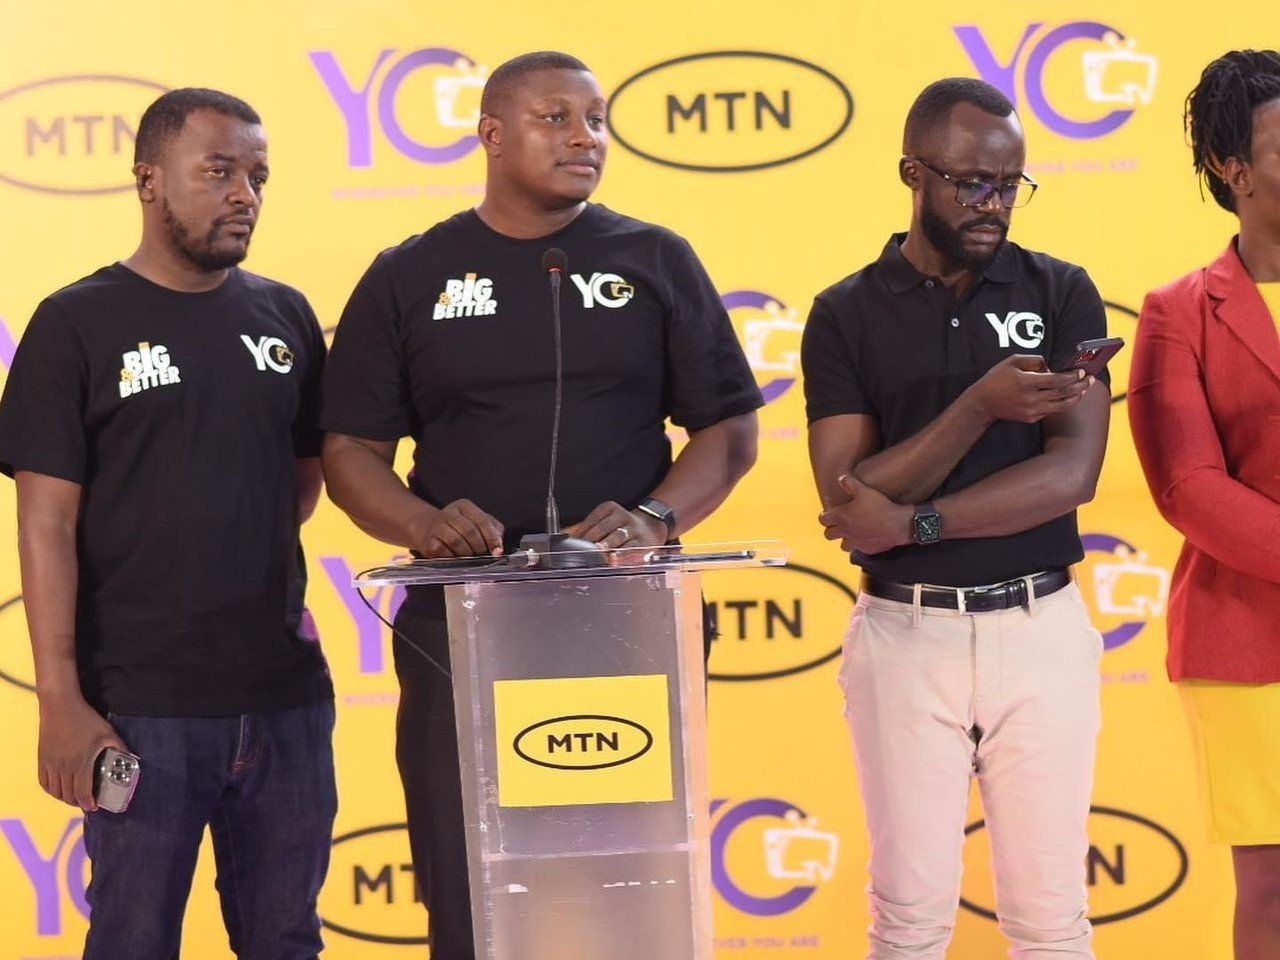 Introducing YOTV Channels App: You’re Ultimate Entertainment Solution